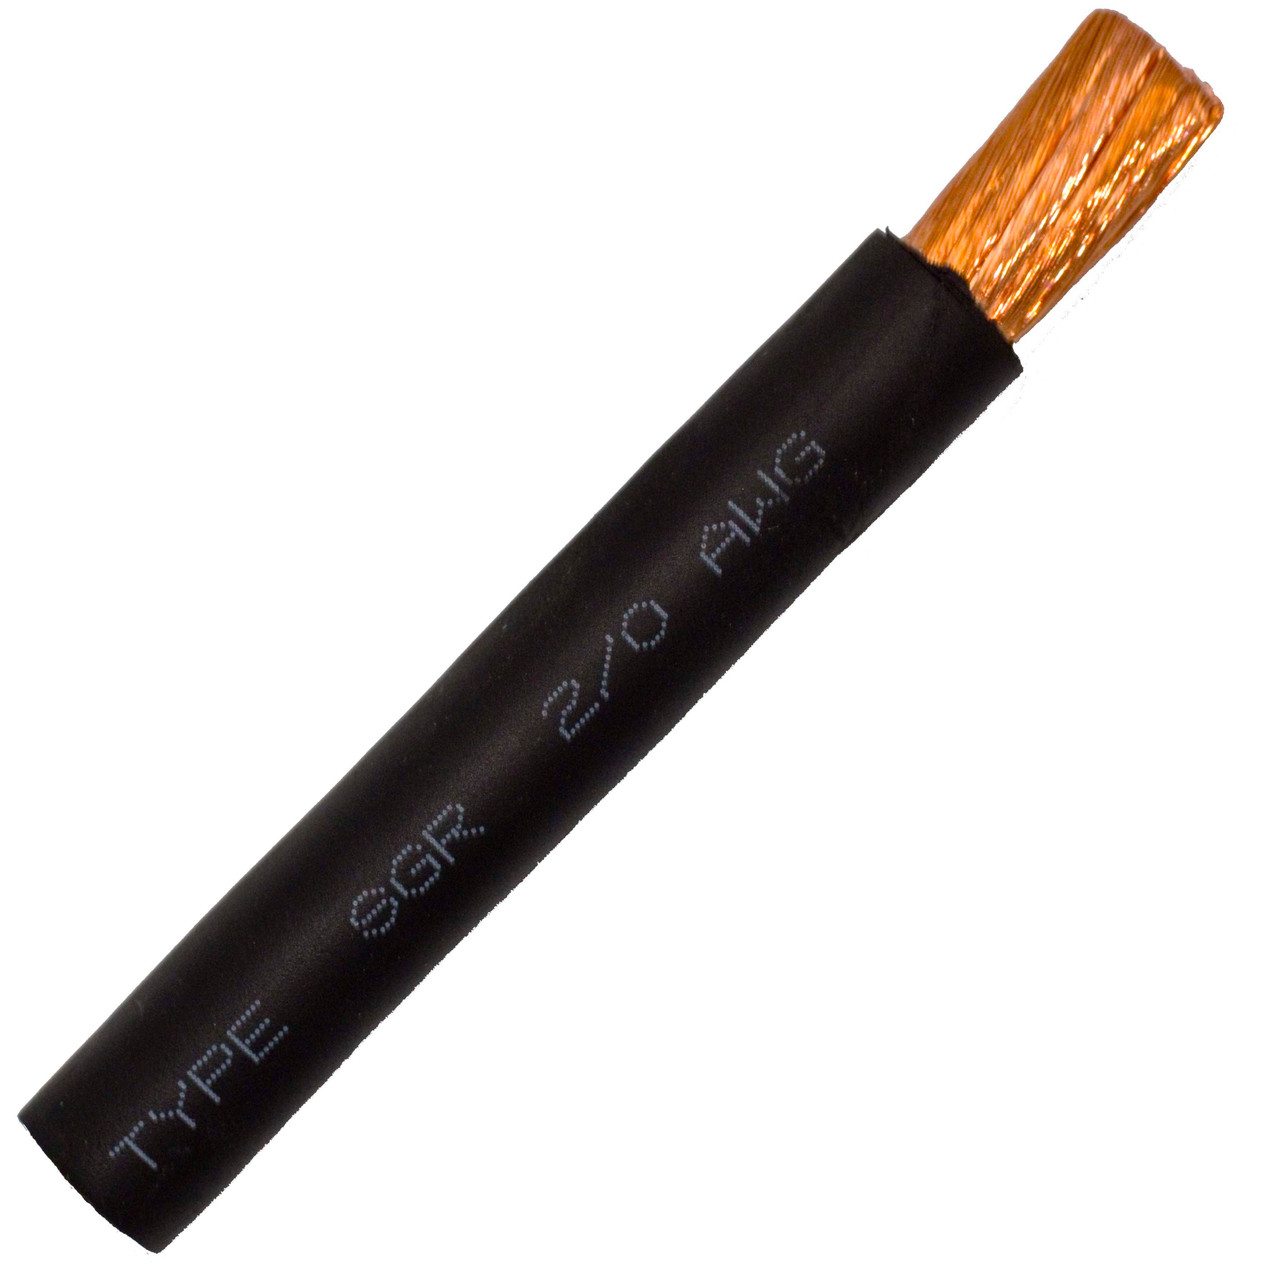 1 AWG @ 25' Premium EPDM Insulated SGR Battery/Starter Cable  8085-24